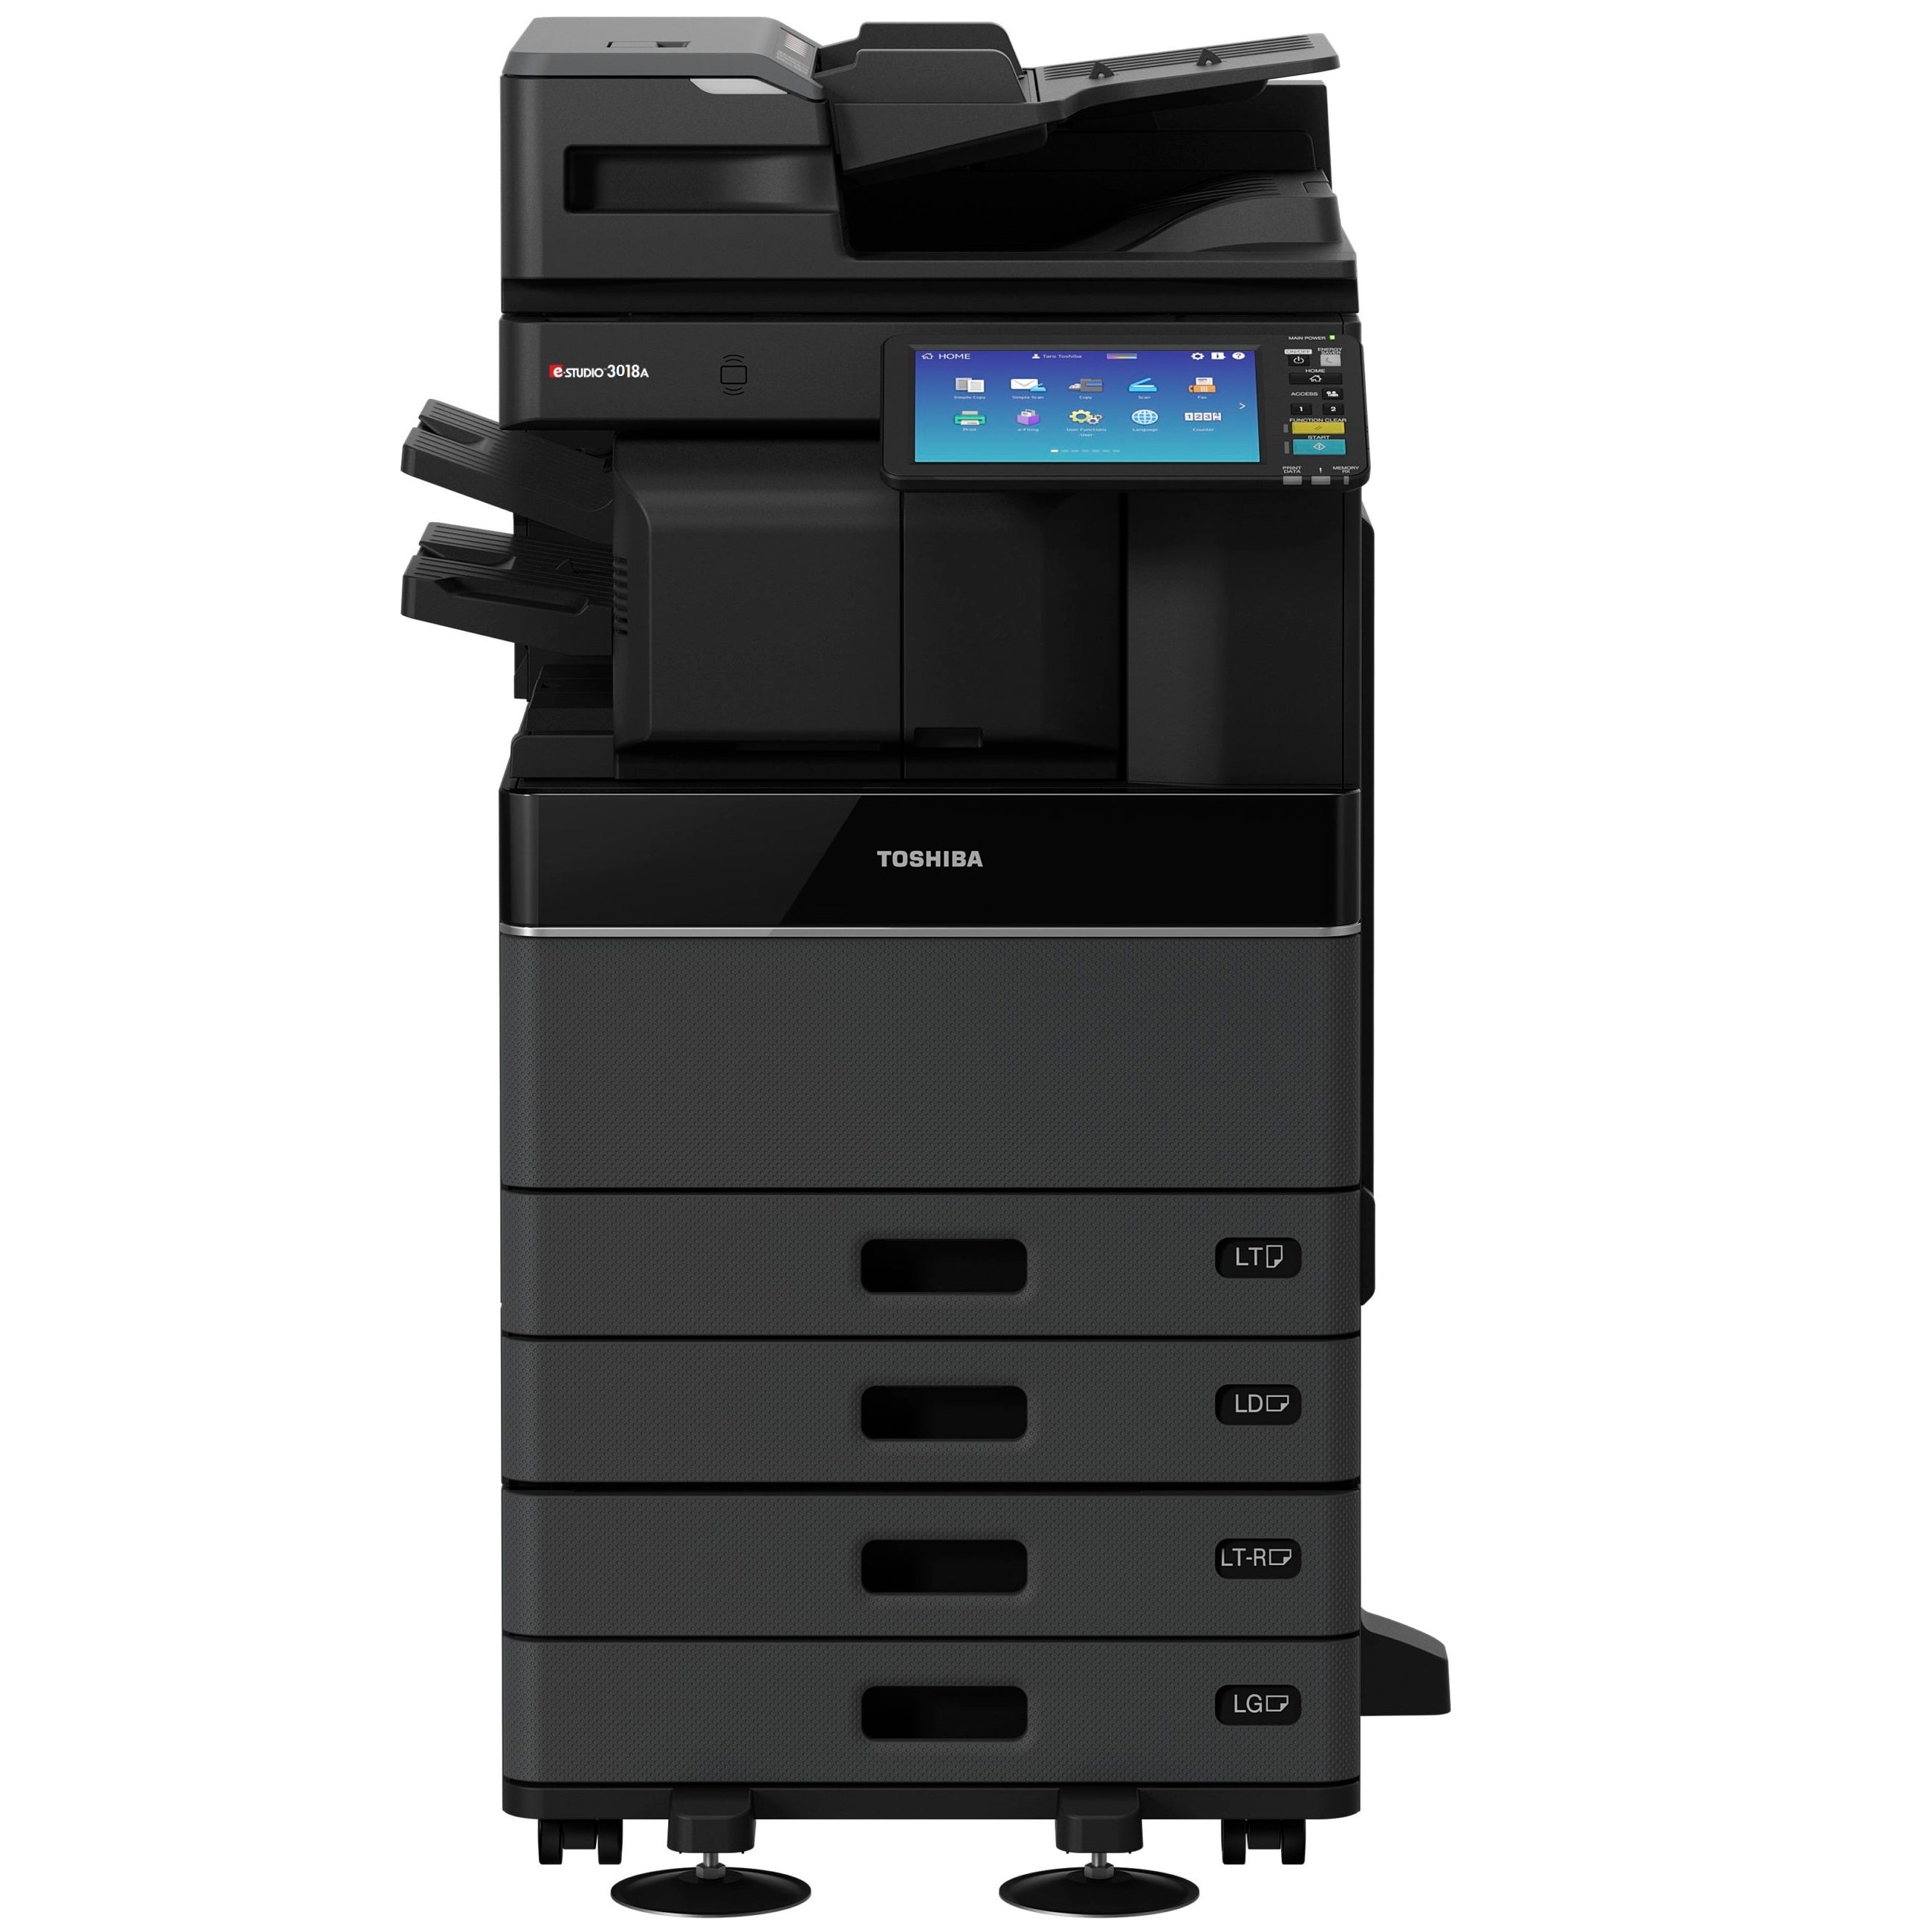 Absolute Toner $69/Month Toshiba e-studio 3018A Black And White Multifunction Copier Printer With Print Up To 30PPM And Dual-Line Fax Option Showroom Color Copiers